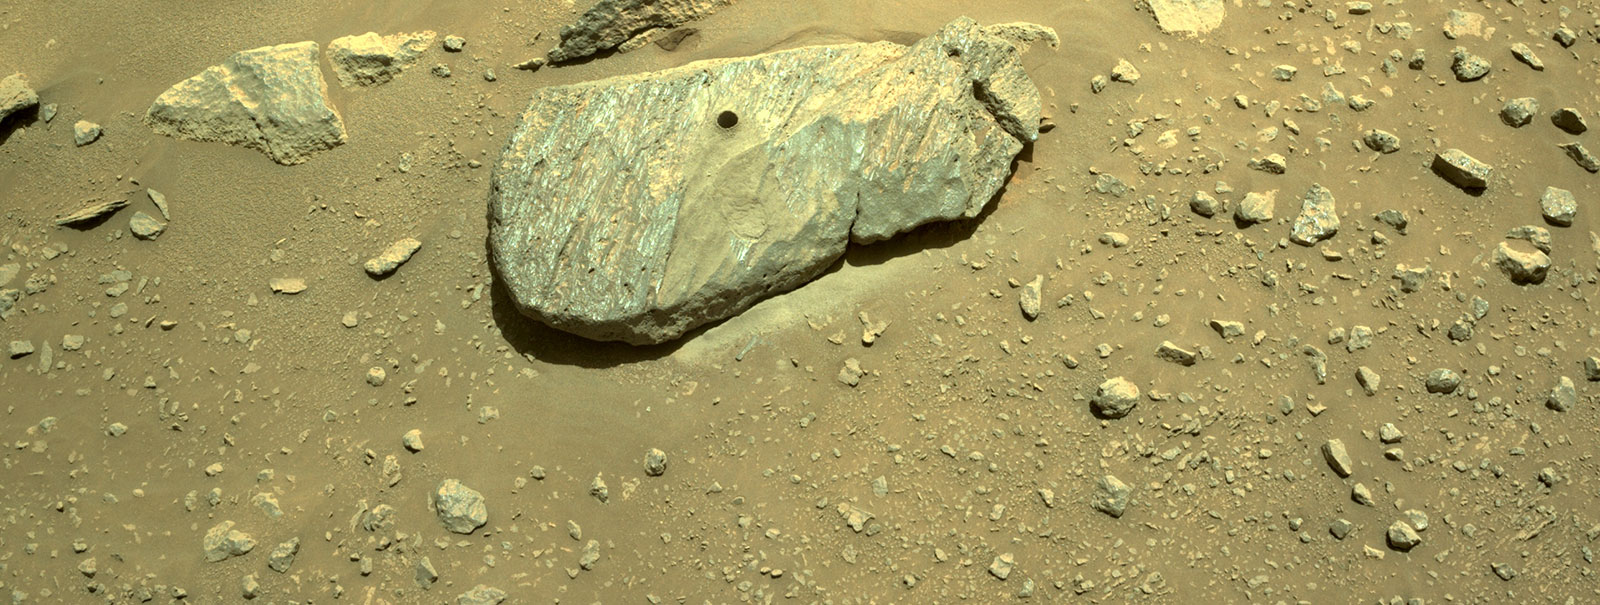 The drill hole from Perseverance's second sample-collection attempt can be seen, in this composite of two images taken on Sept. 1, by one of the rover’s navigation cameras.